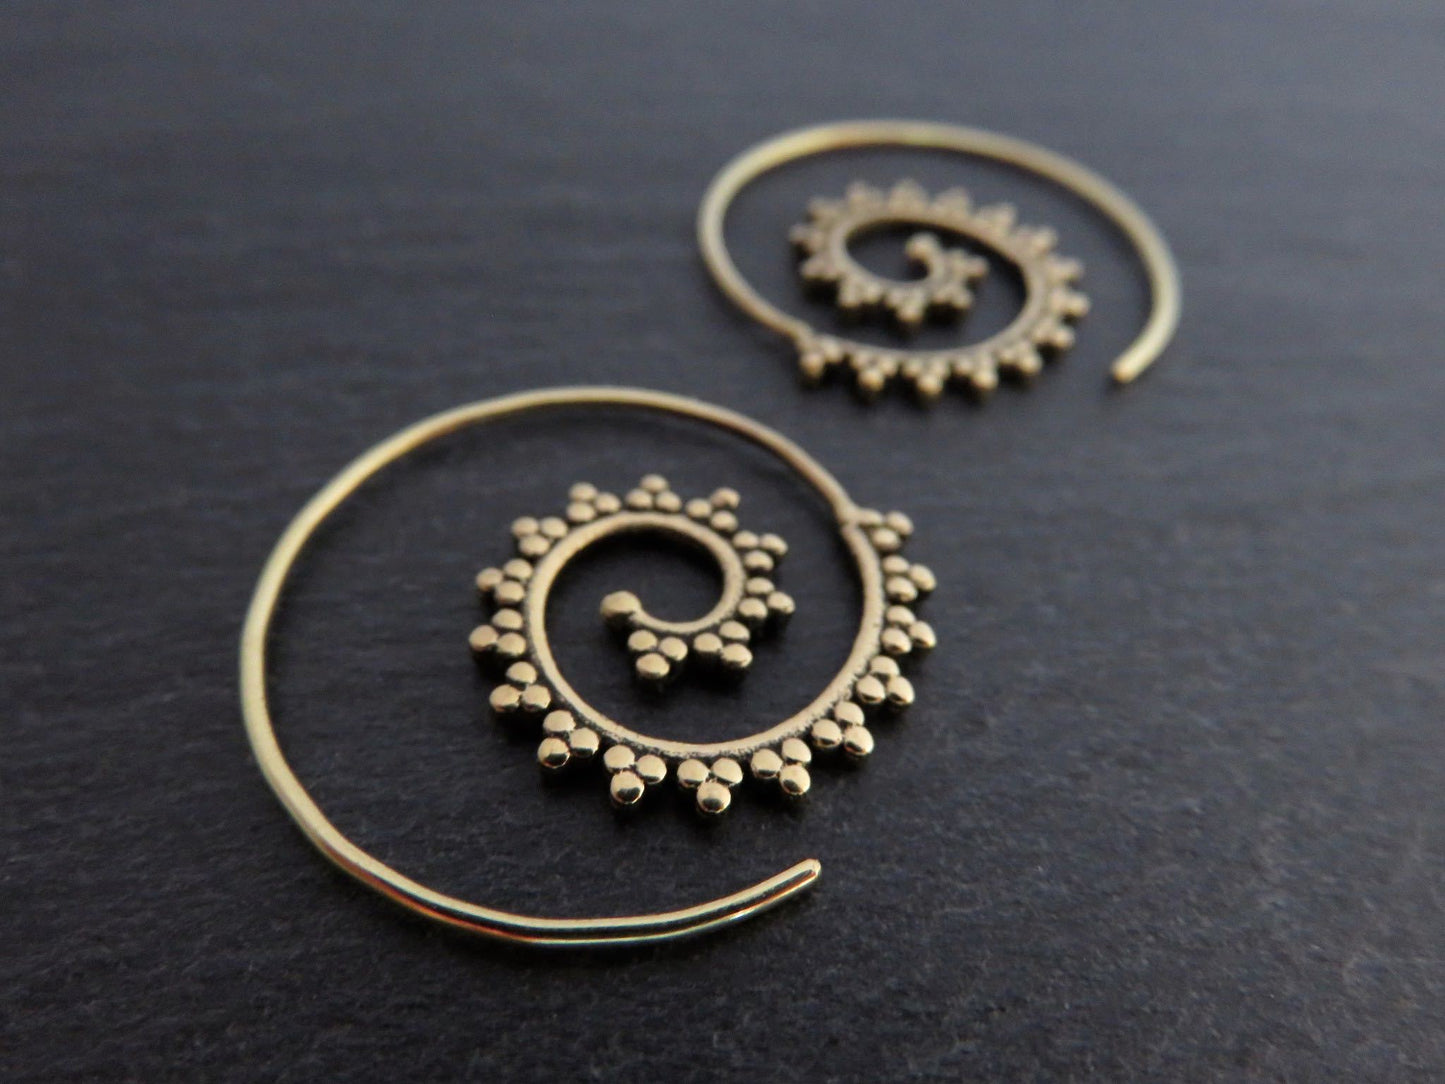 small spiral earrings patterned with small dots made of brass 